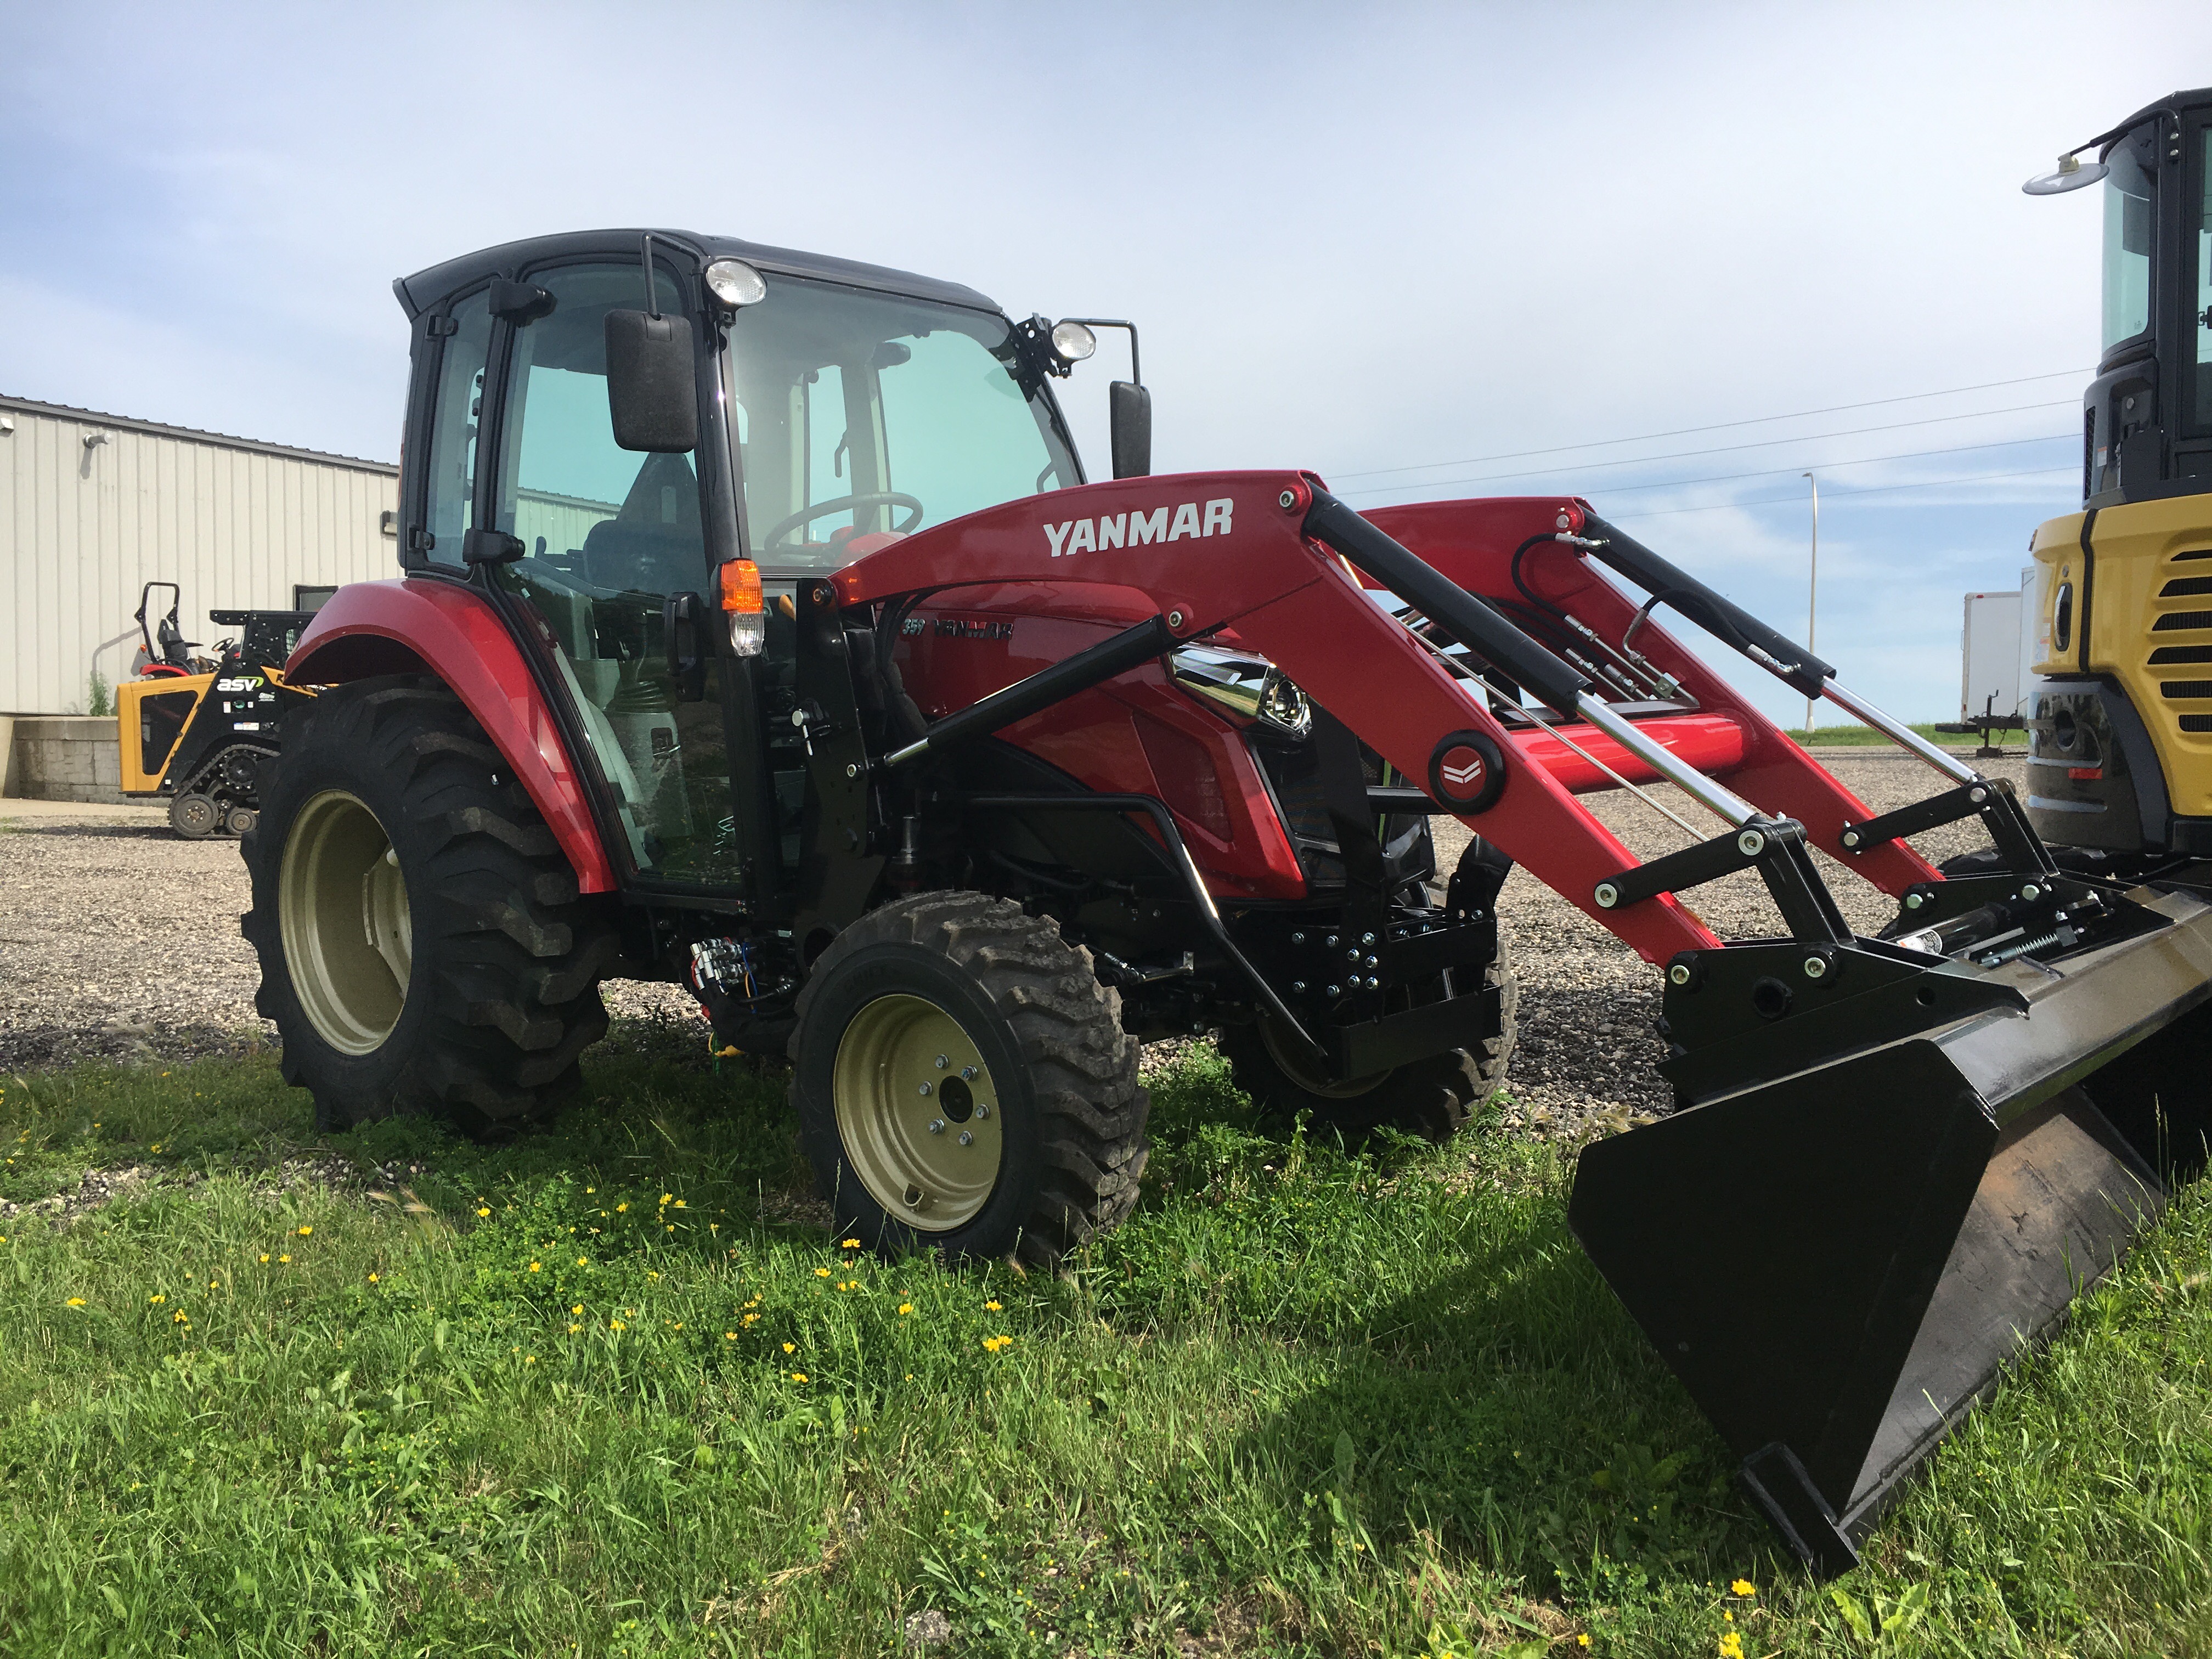 Yanmar Compact Tractors 0 Financing For 72 Months Classified Ads